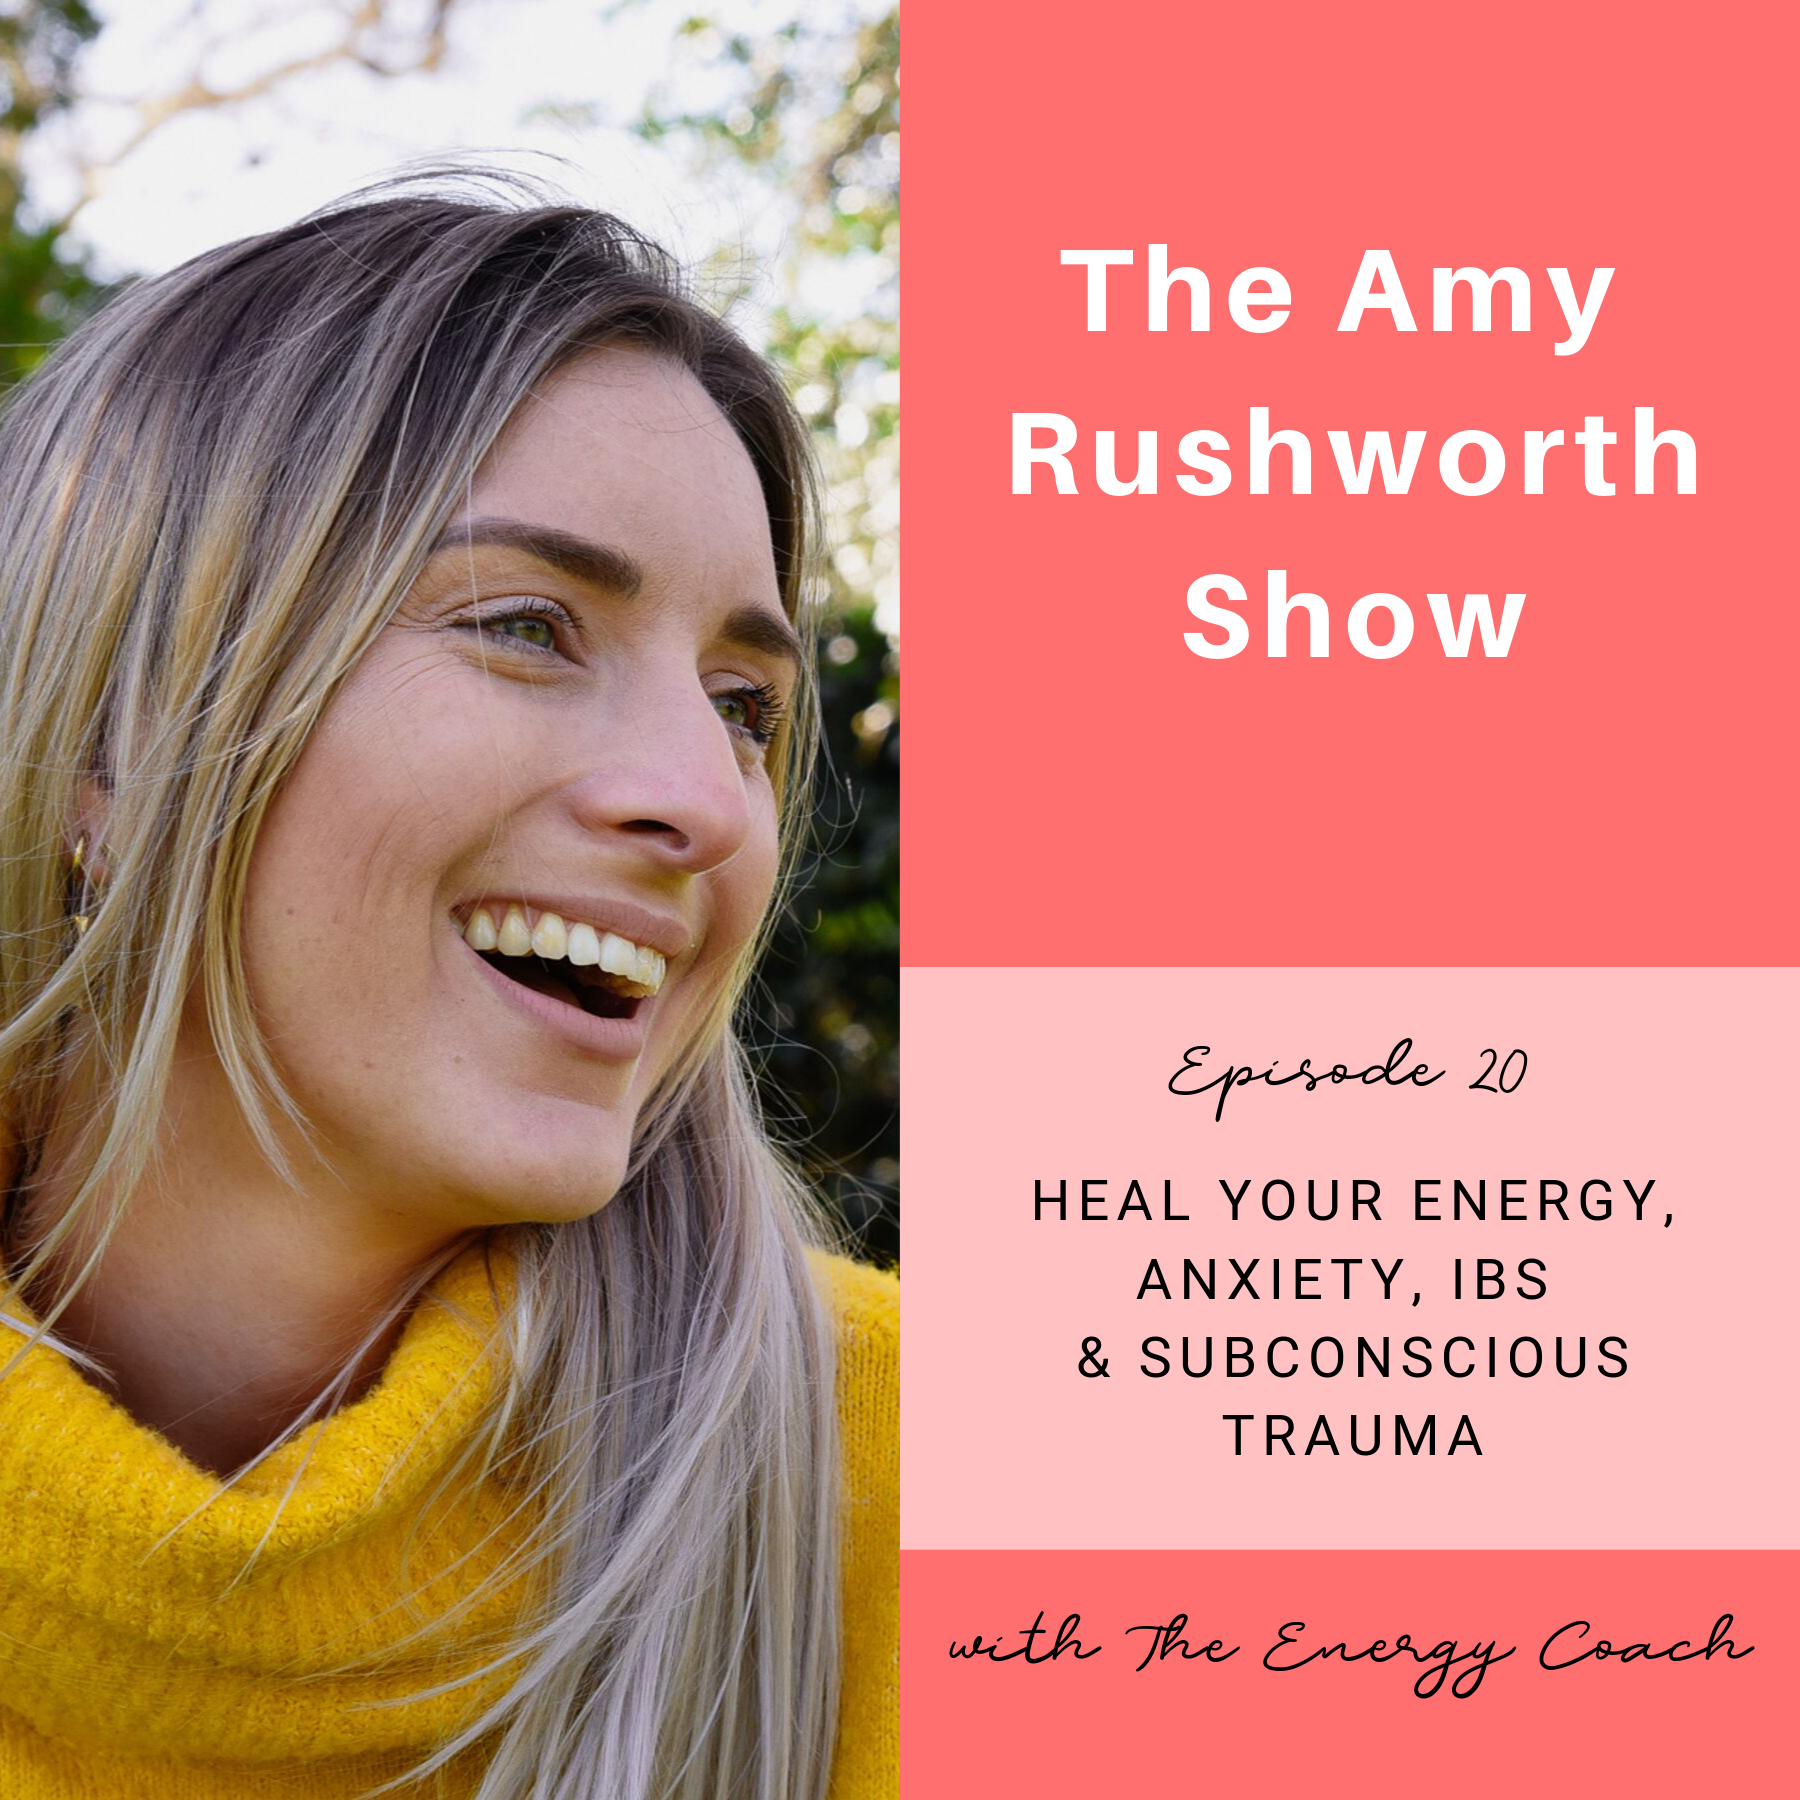 Episode 20: Heal Your Energy, Anxiety, IBS & Subconscious Trauma with The Energy Coach